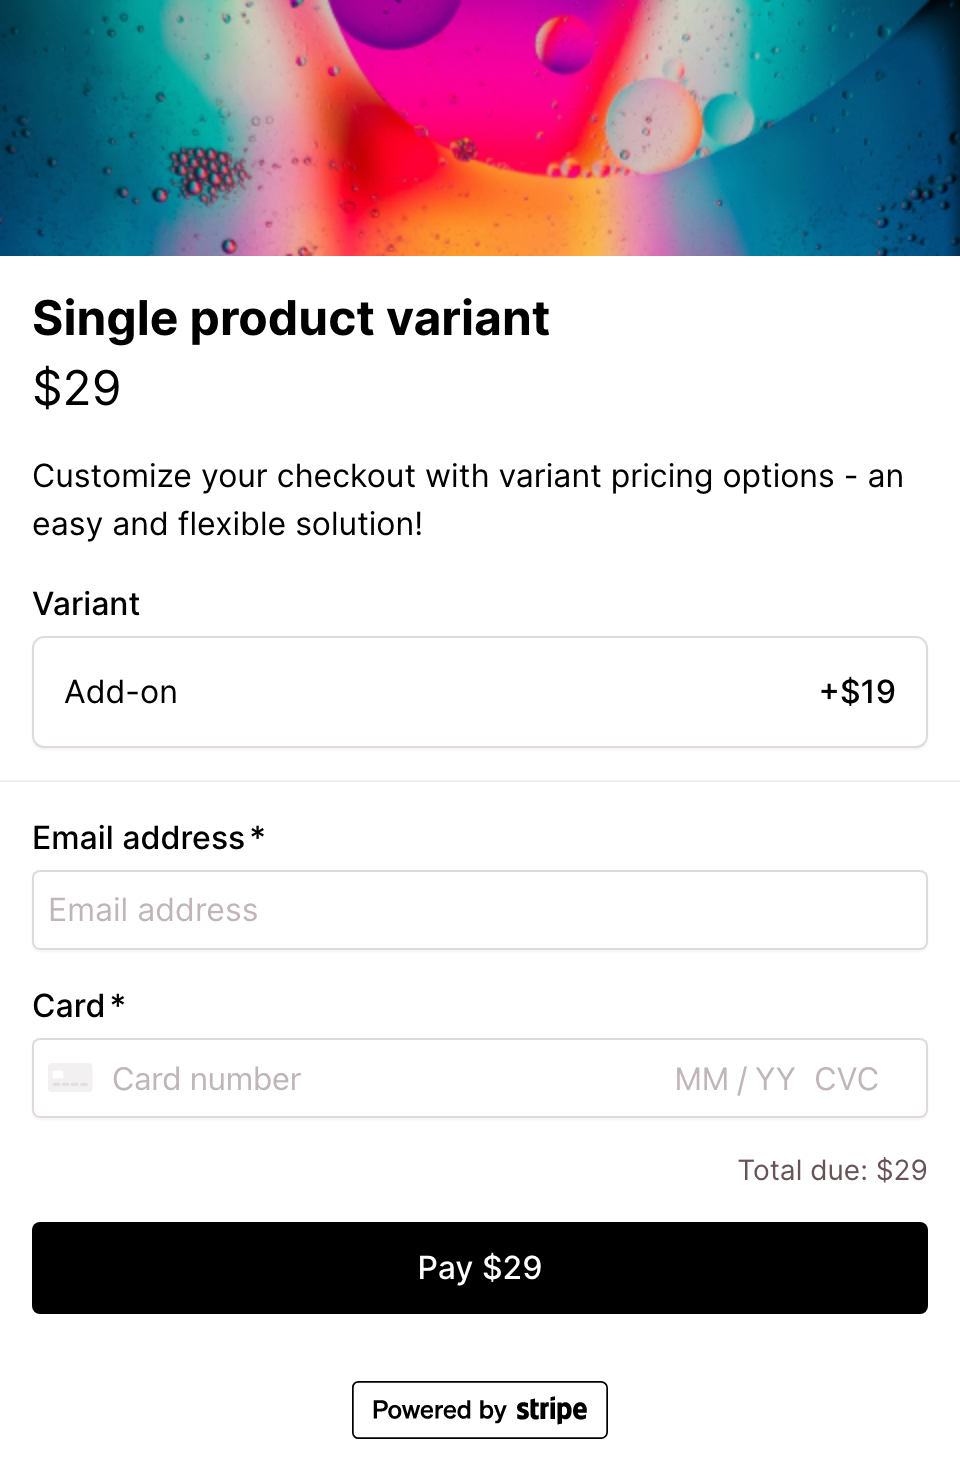 Single variant checkout form